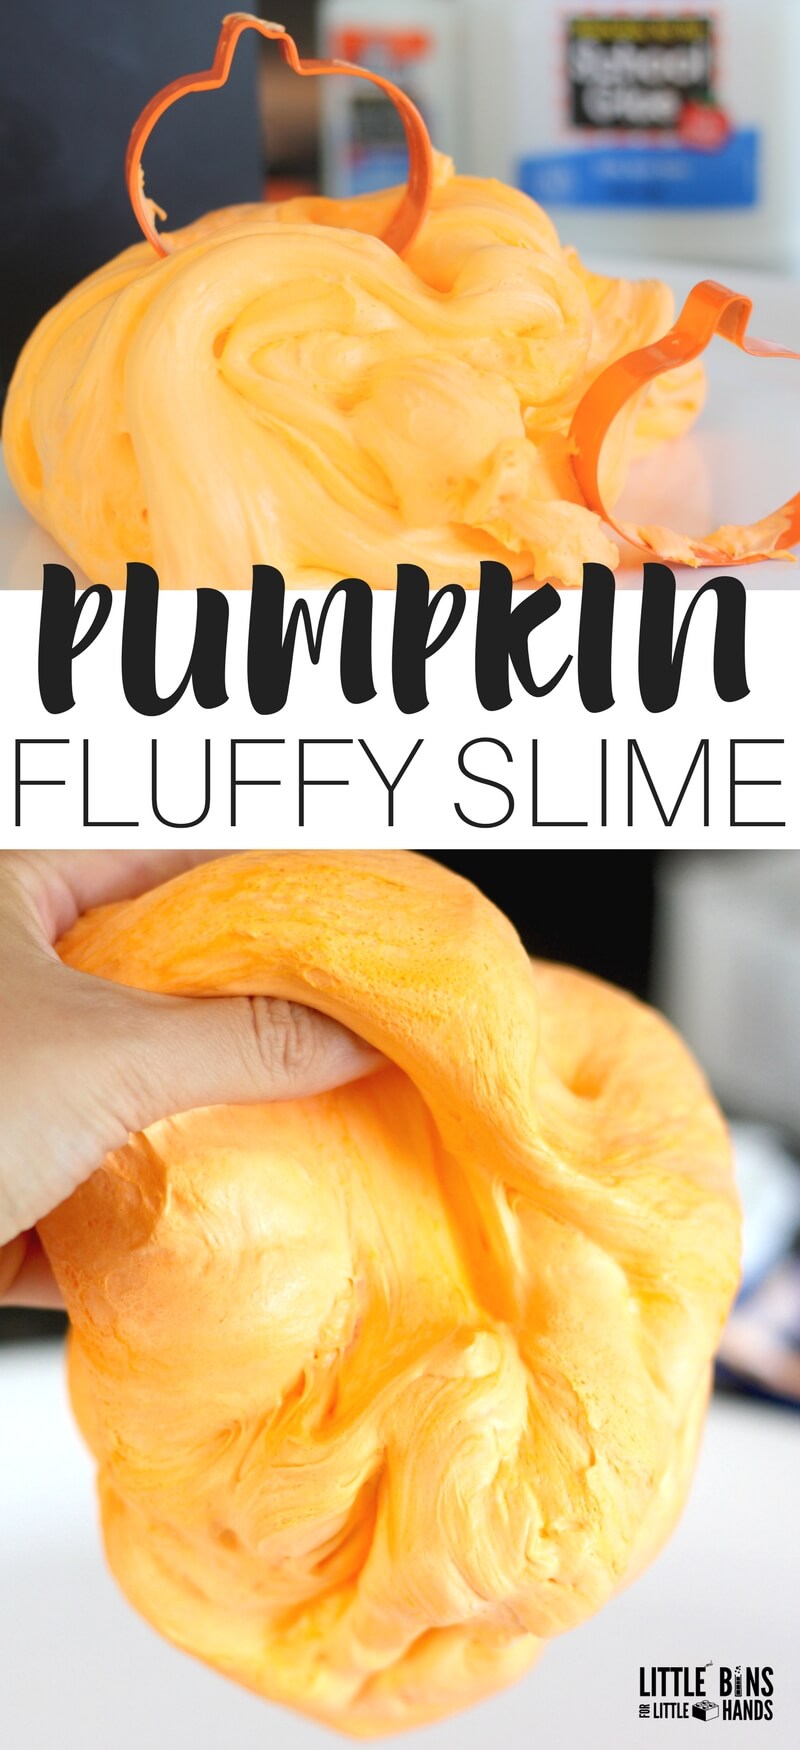 Homemade orange pumpkin fluffy slime recipe shaving cream is perfect for kids to make for fall or Halloween slime ideas! Our easy homemade slime recipes make great kid science and sensory play. Fluffy slime is easy to make with just a few simple ingredients including shaving cream and saline solution! You choose the color and the fun! We even have fluffy slime videos to share with our slime recipe tutorials.